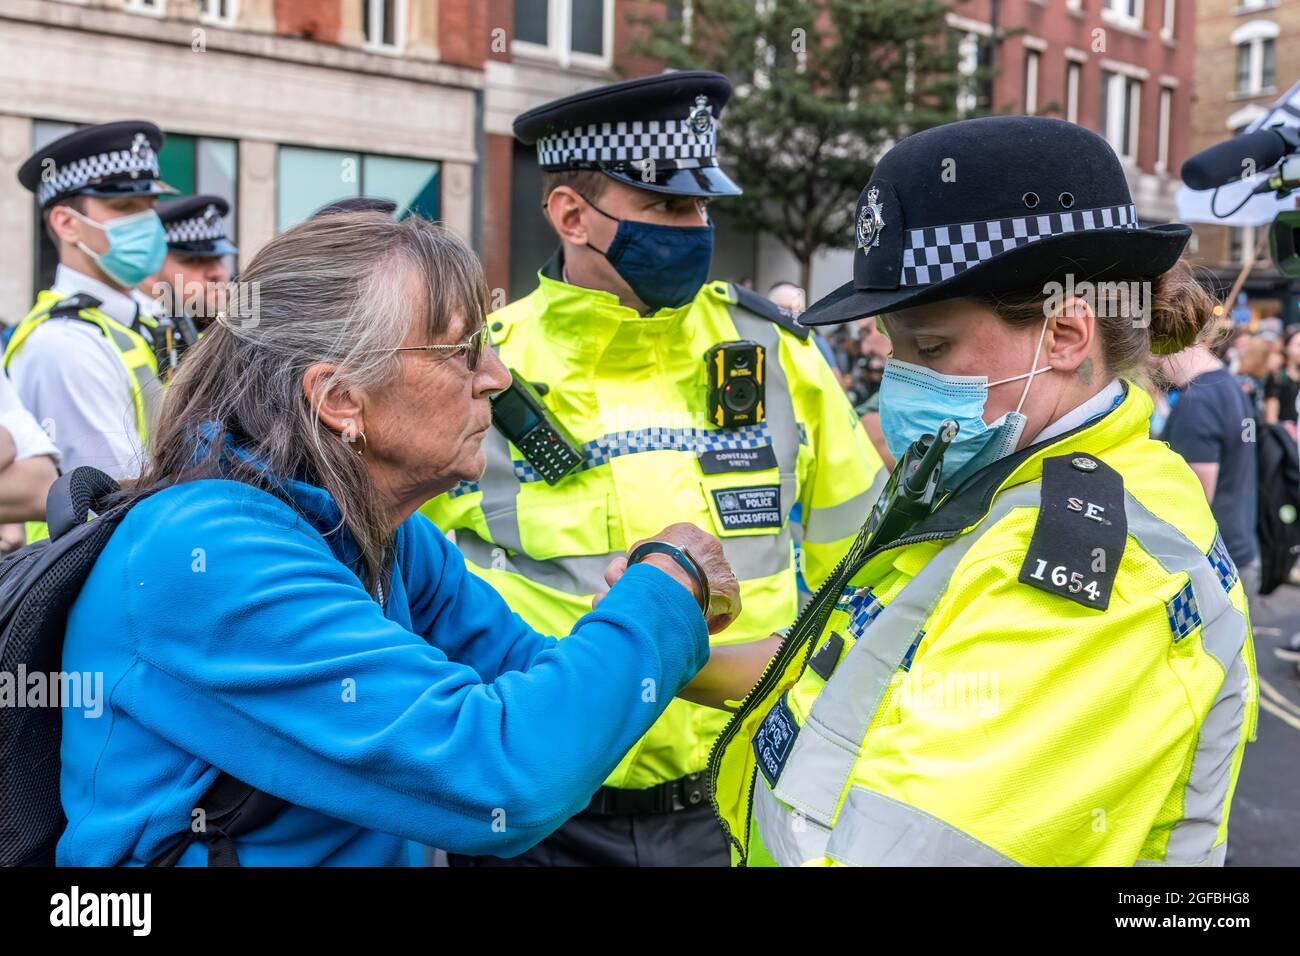 London, UK. 24th Aug, 2021. A protester arrested at Cambridge Circus, during the demonstration.‘The Impossible Rebellion' protest against climate change, global warming, which plans to target the root cause of the climate and ecological crisis and to demand the government divest from fossil fuel companies by Extinction Rebellion. (Photo by Dave Rushen/SOPA Images/Sipa USA) Credit: Sipa USA/Alamy Live News Stock Photo